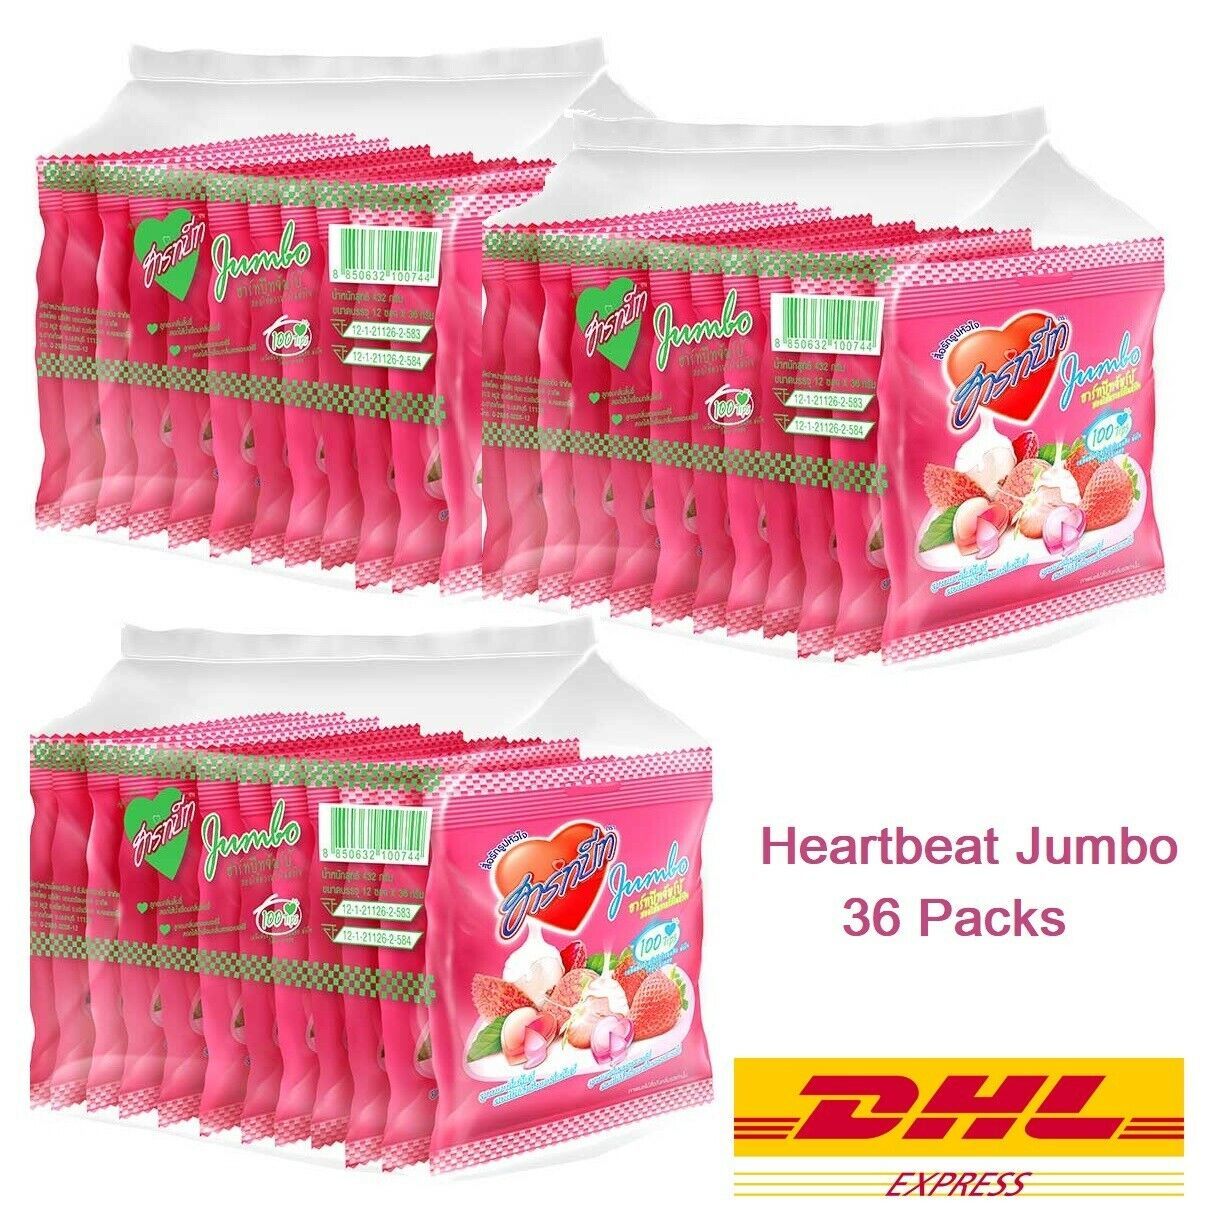 36 x Heartbeat Jumbo Candy Strawberry and Lychee Flavour 8 Tablets/Bag - $58.37